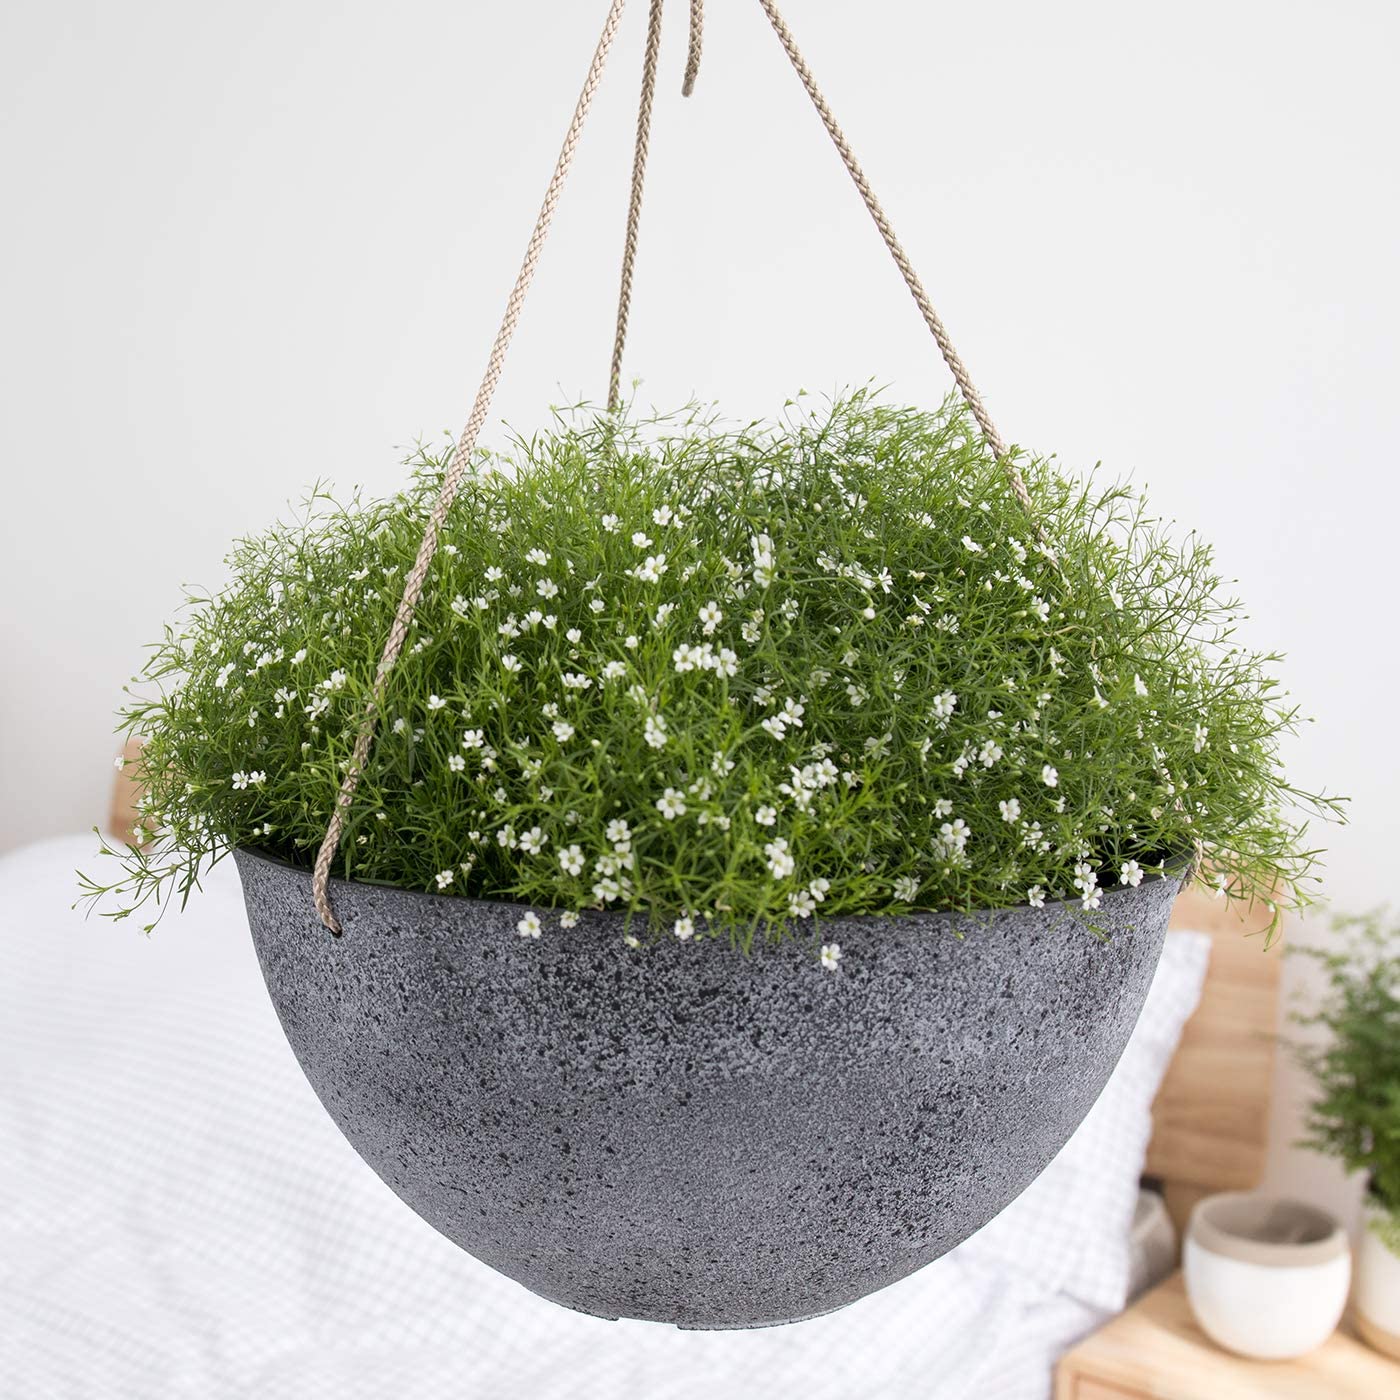 F1FC Wall Mounted Basket Garden Hanging Plant Pot Hanging Planter Plant Planter 